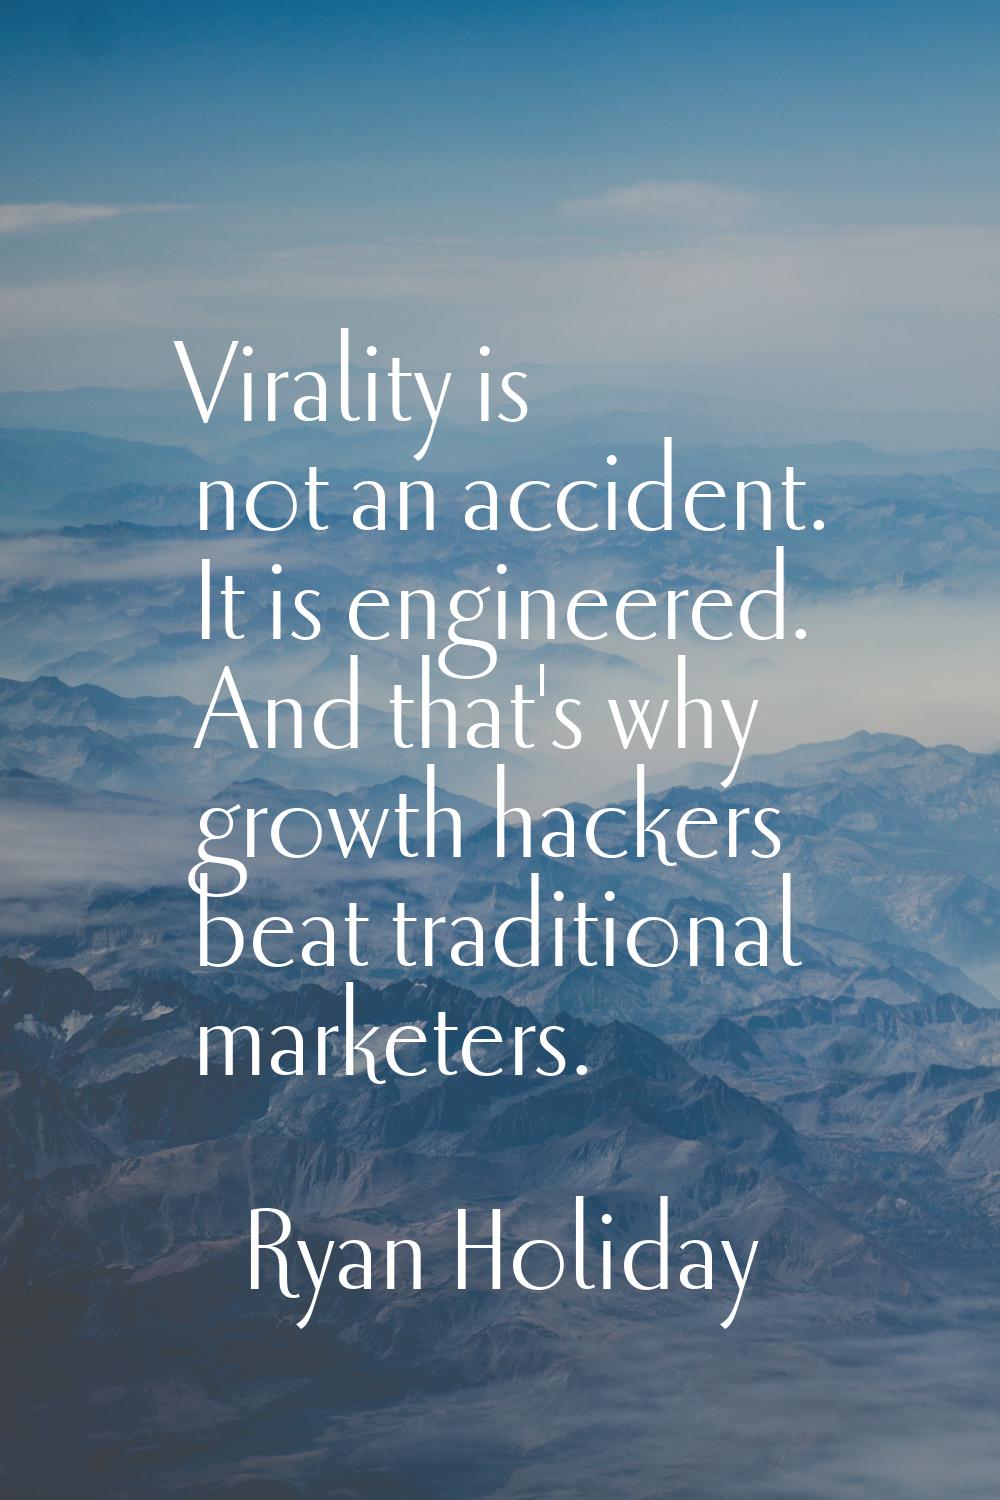 Virality is not an accident. It is engineered. And that's why growth hackers beat traditional marke